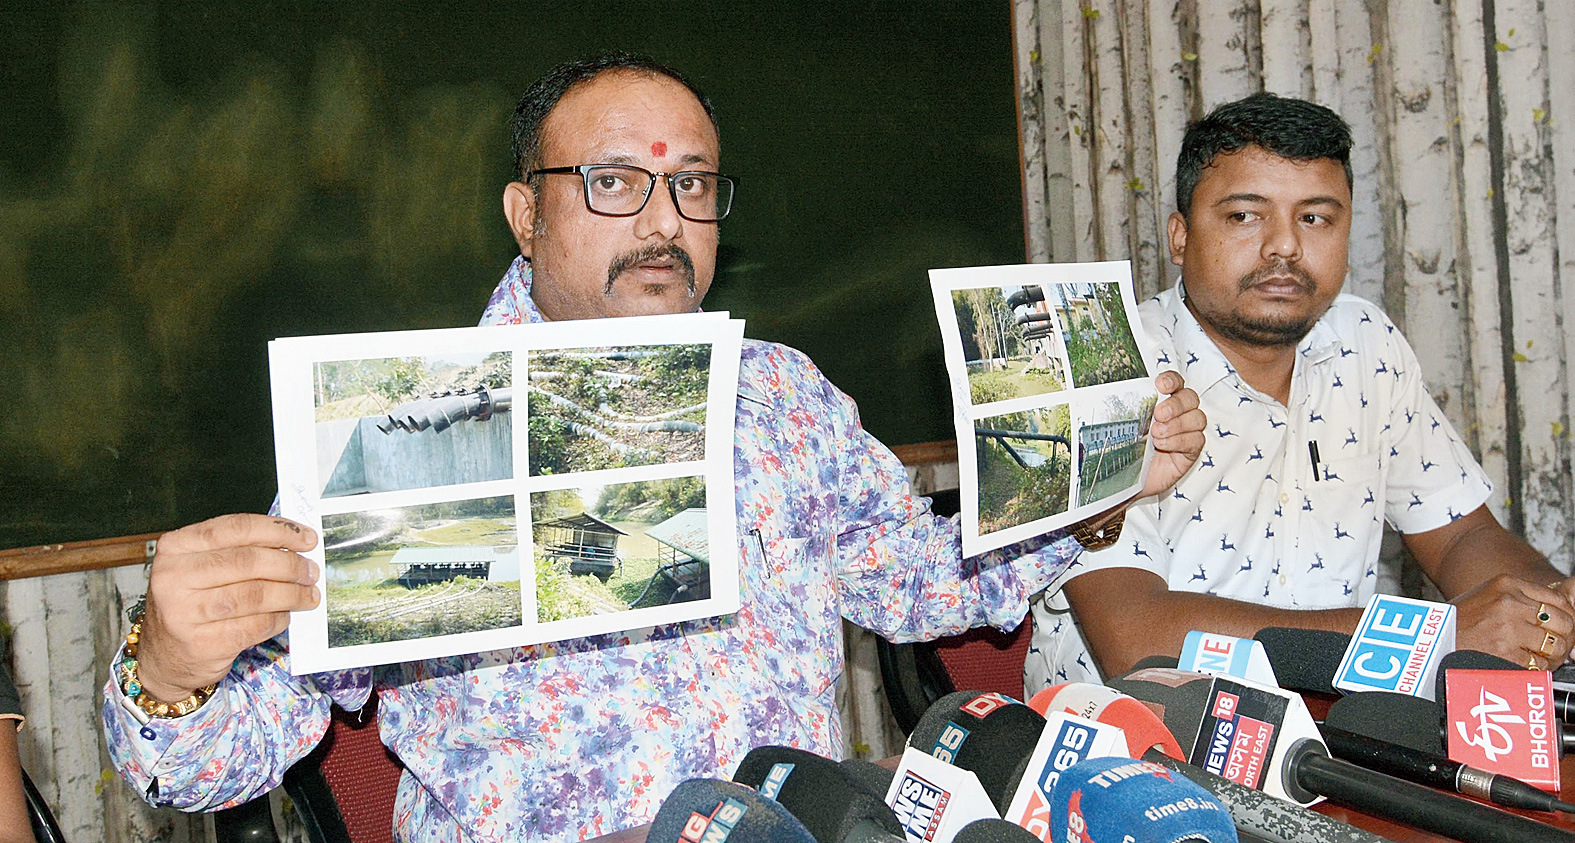 APW president Aabhijeet Sharma at the news conference in Guwahati on Saturday.